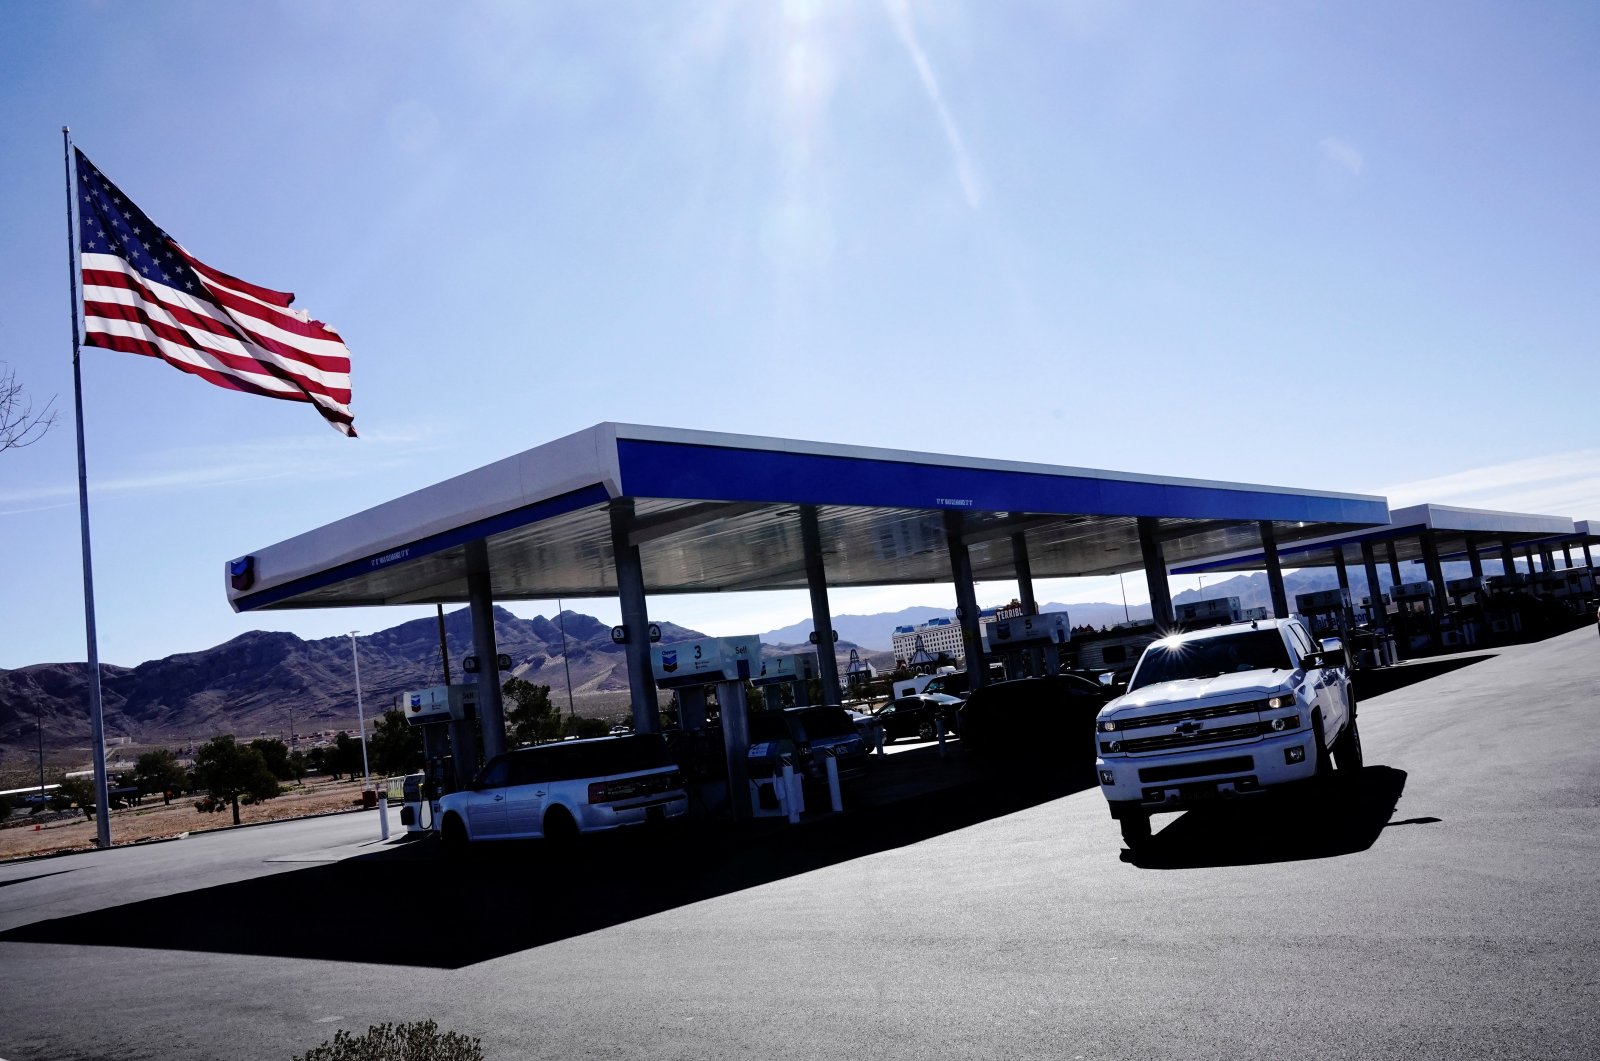 A Chevrolet pickup truck drives past fuel pumps at Terrible’s Road House, the world’s largest Chevron gas station, in Jean, Nevada, U.S., Feb. 27, 2022. (Reuters Photo)